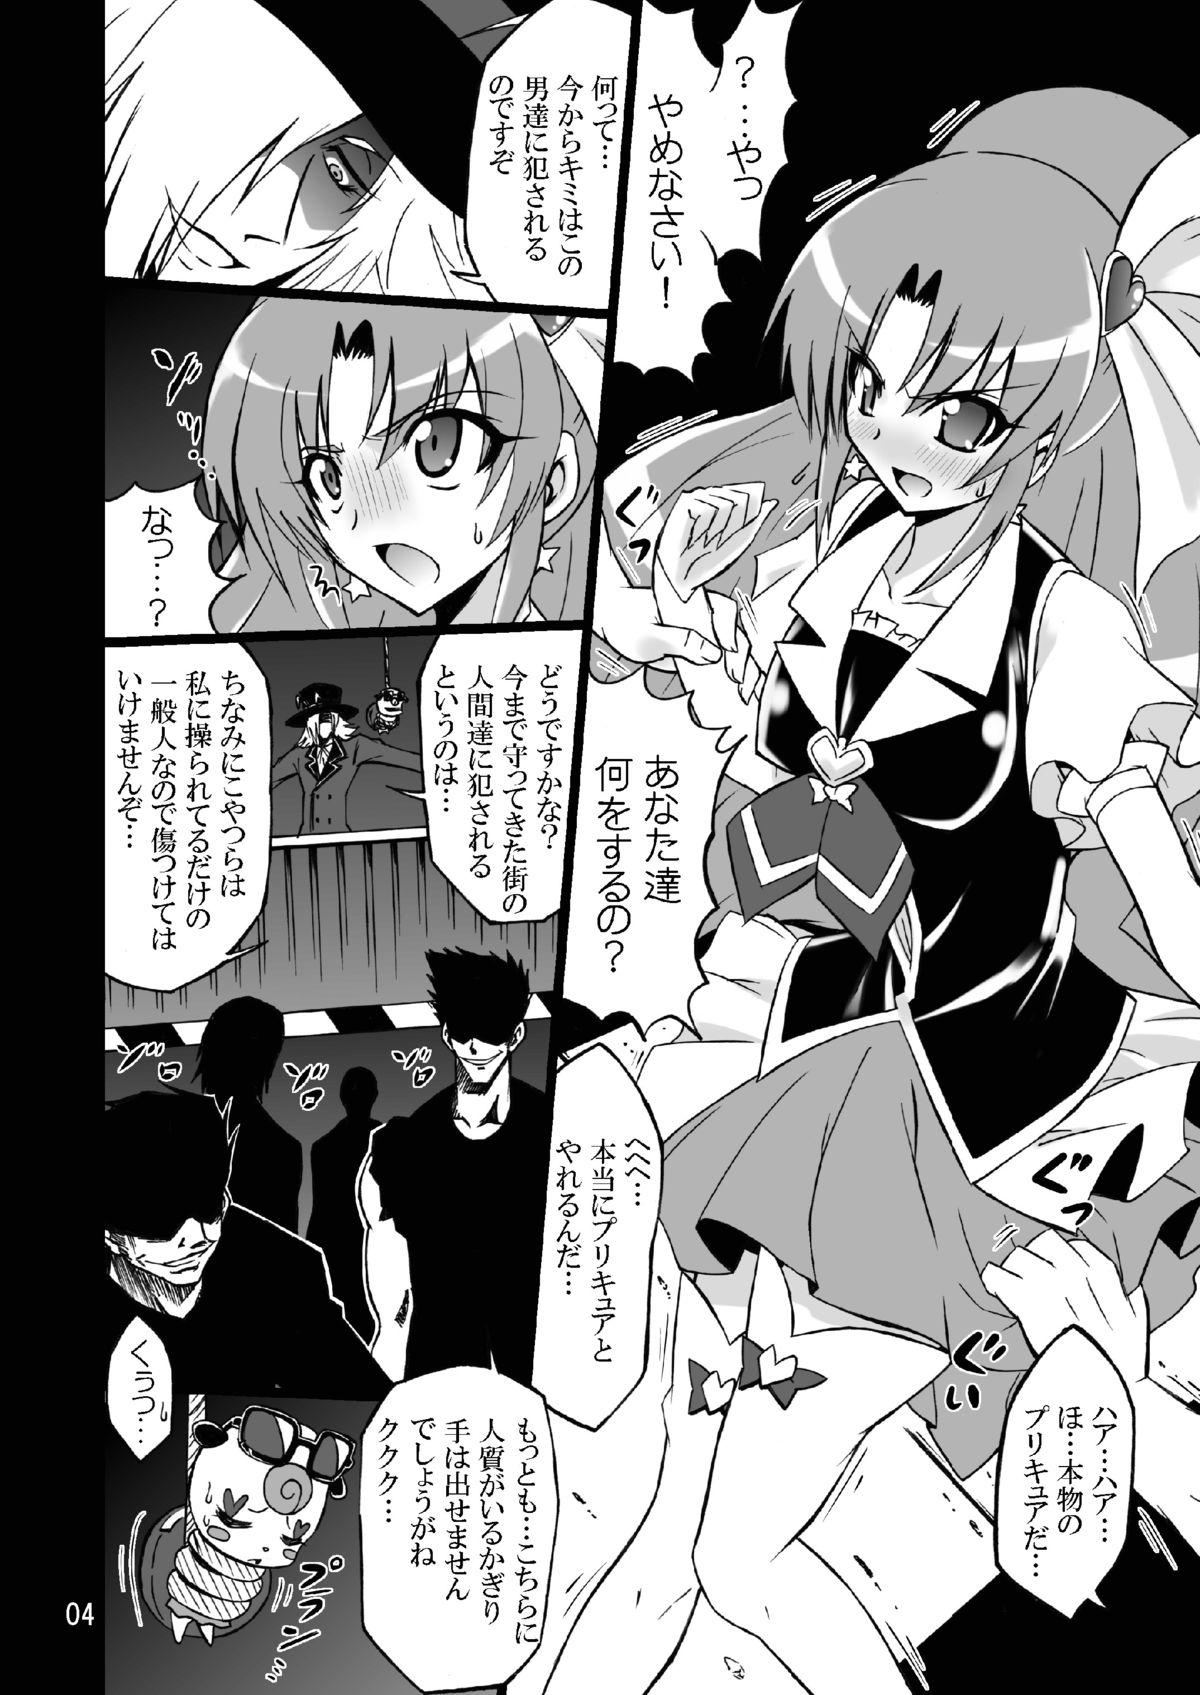 Anus WHEEL of FORTUNE - Dokidoki precure Happinesscharge precure Edging - Page 4